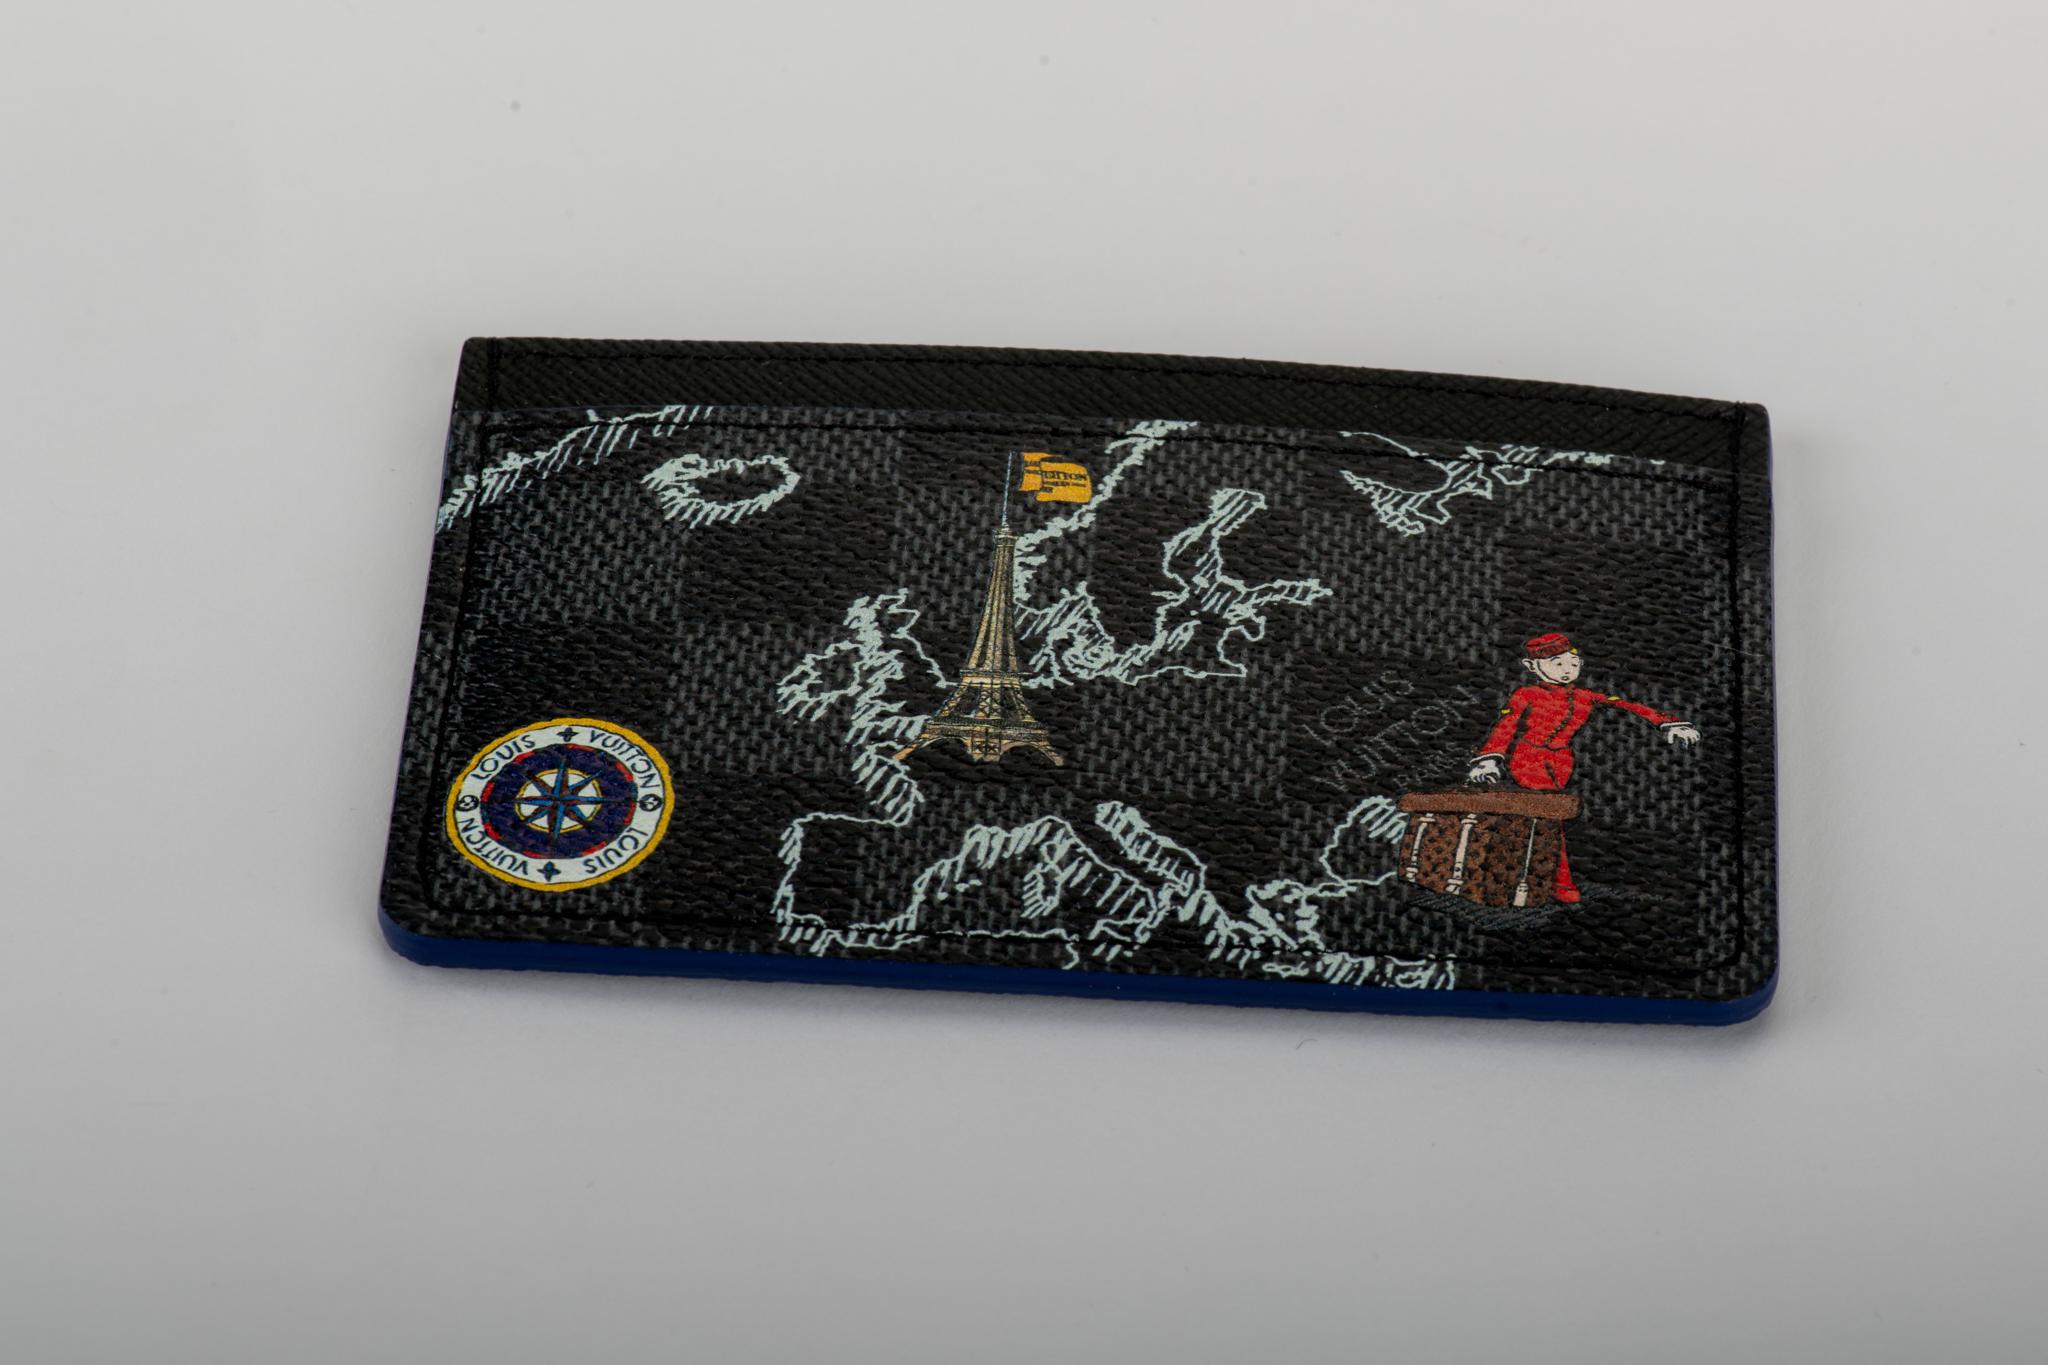 Louis Vuitton limited edition graphite damier card case with Europe map design. Brand new in box with dust cover.